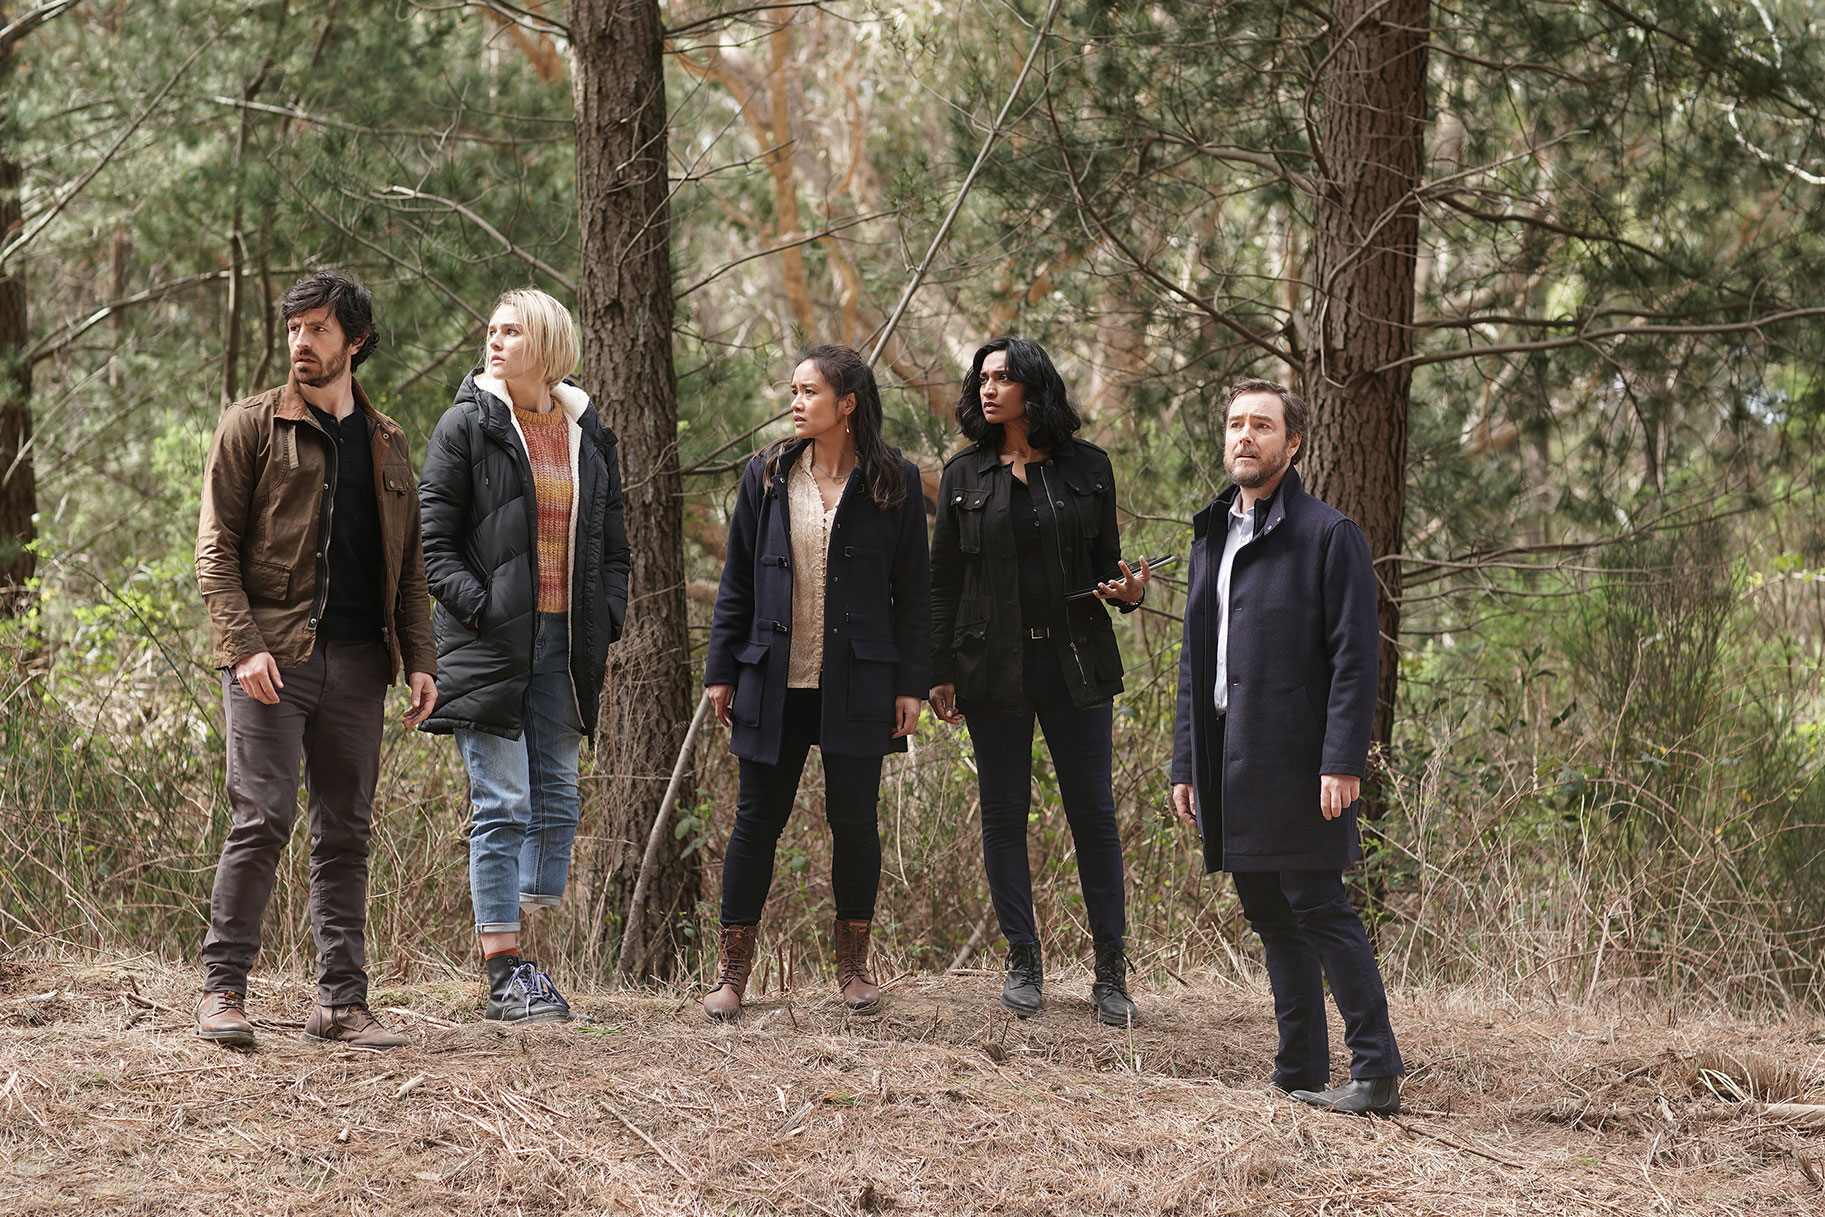 La Brea cast standing on the forest